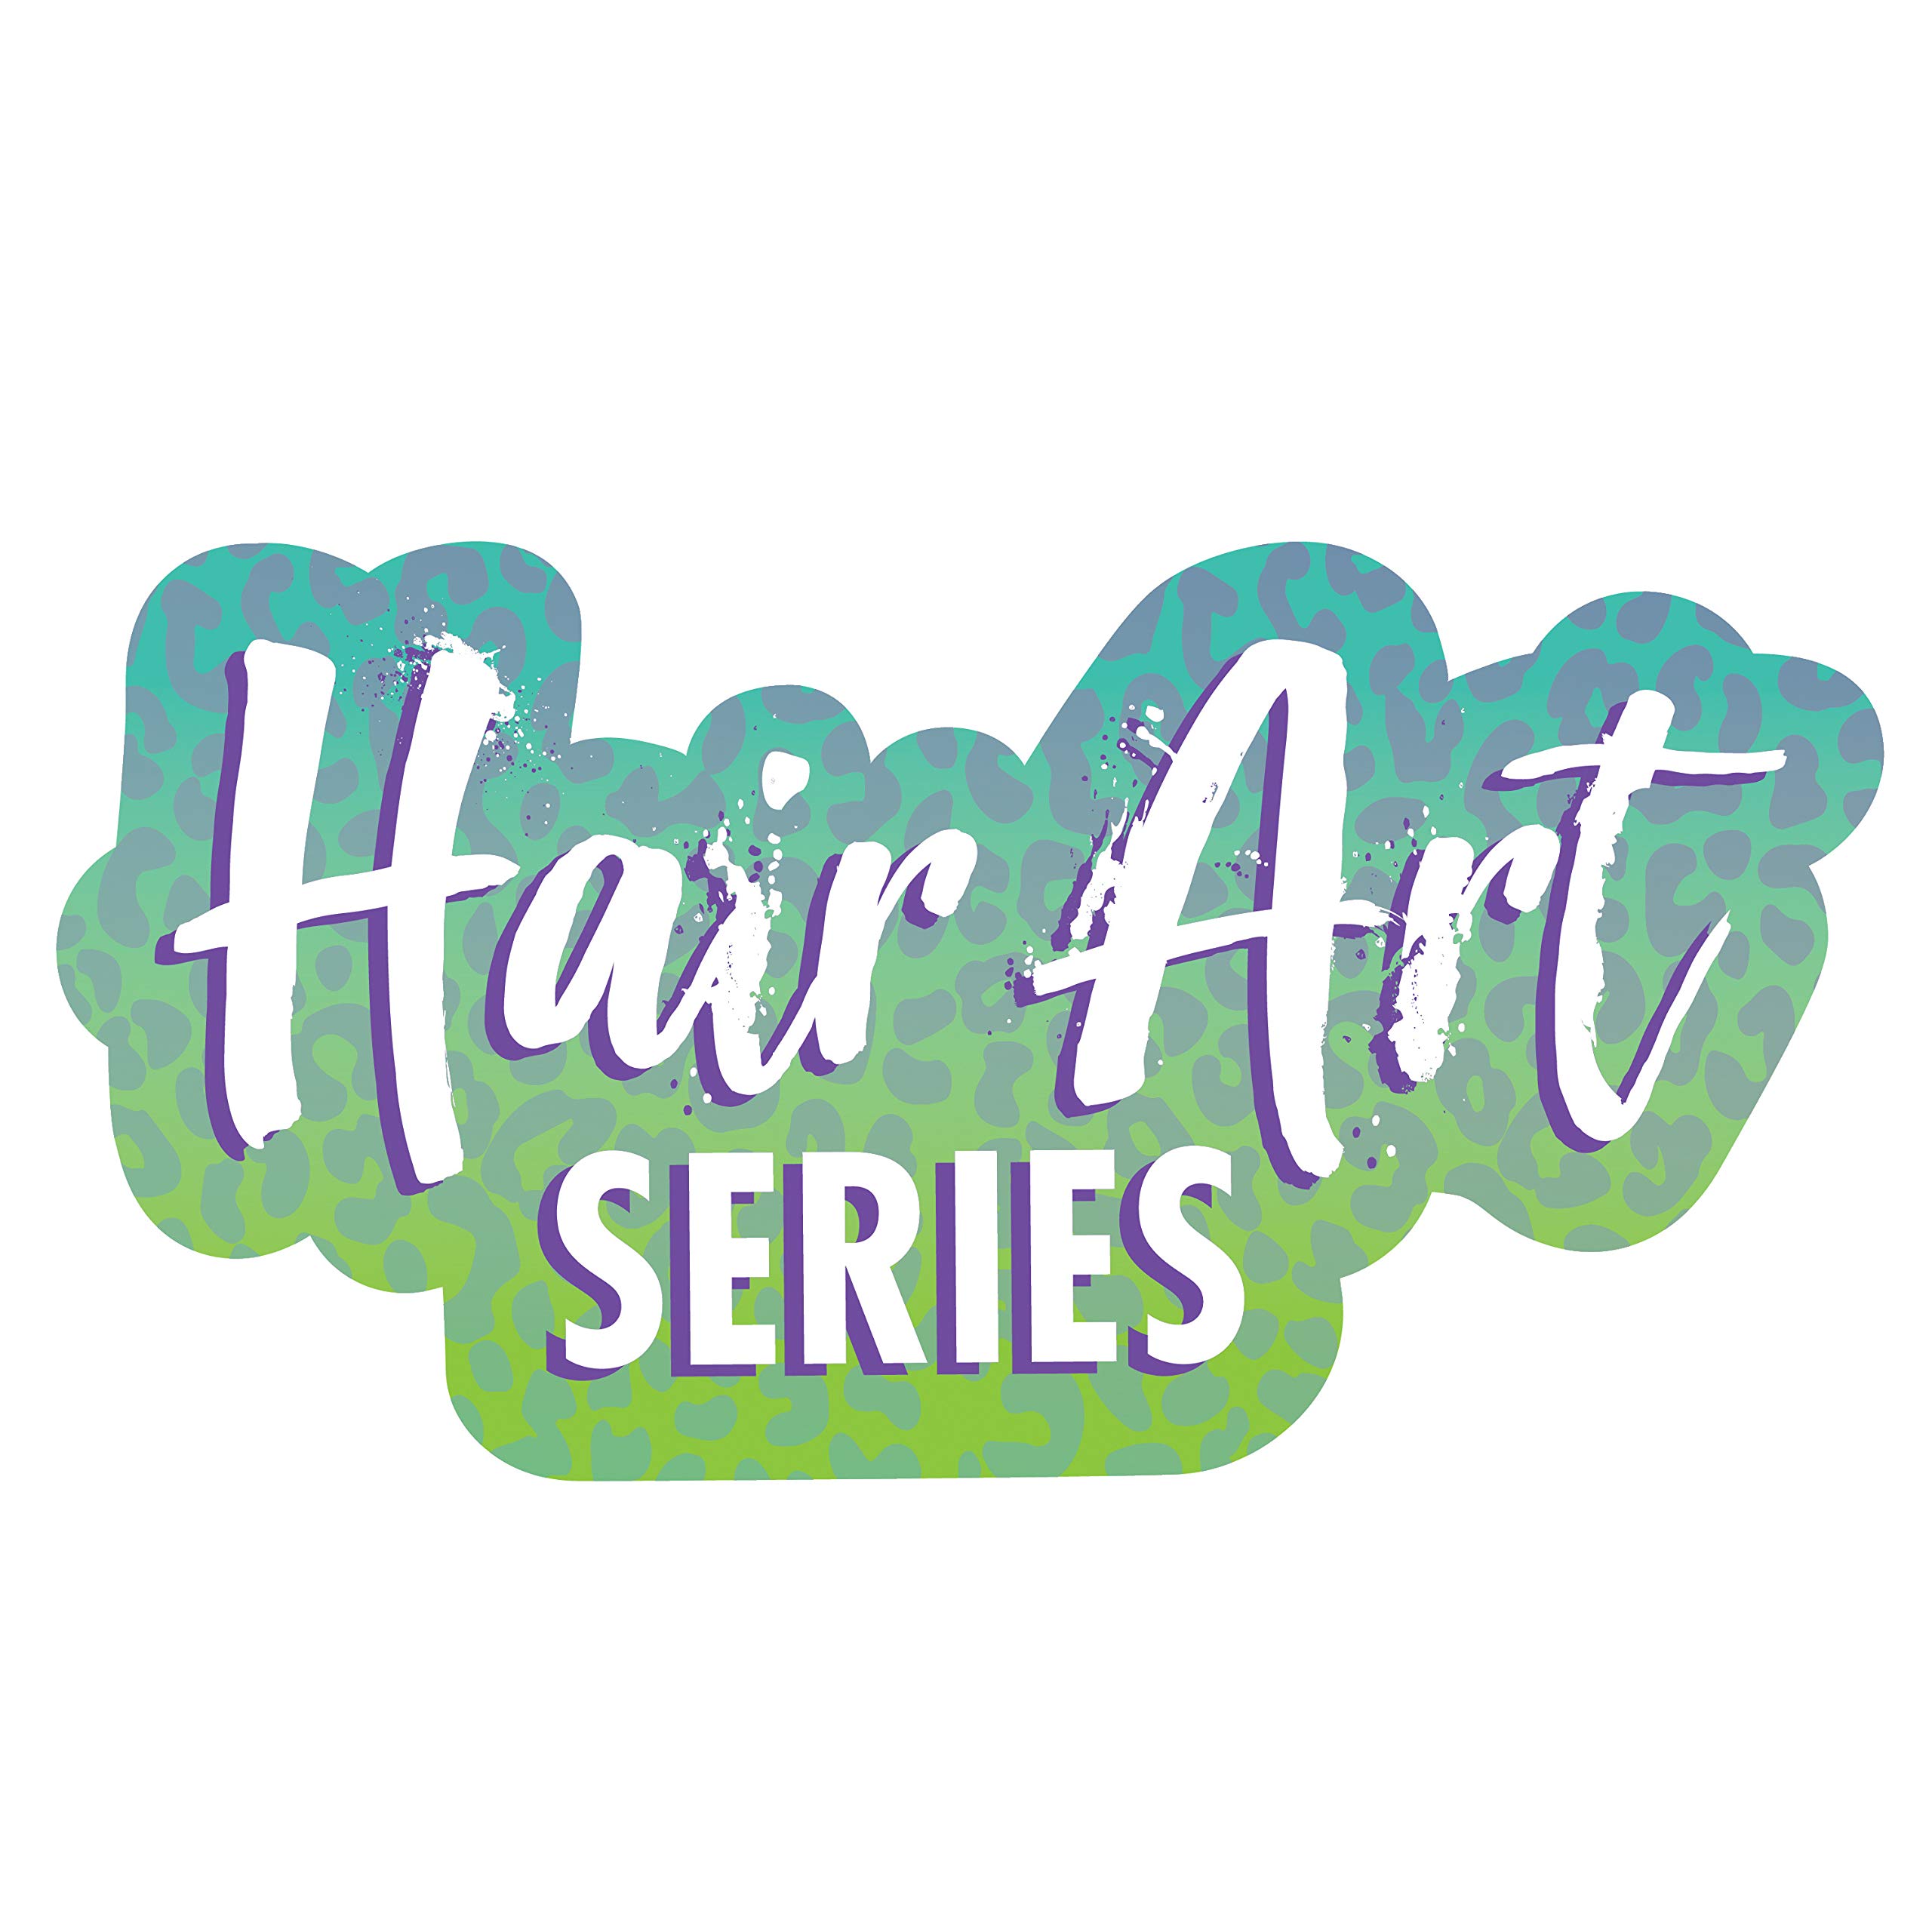 Hairdorables Collectible Doll Hair Art Series 5, styles and case colors may vary, each sold separately, by Just Play